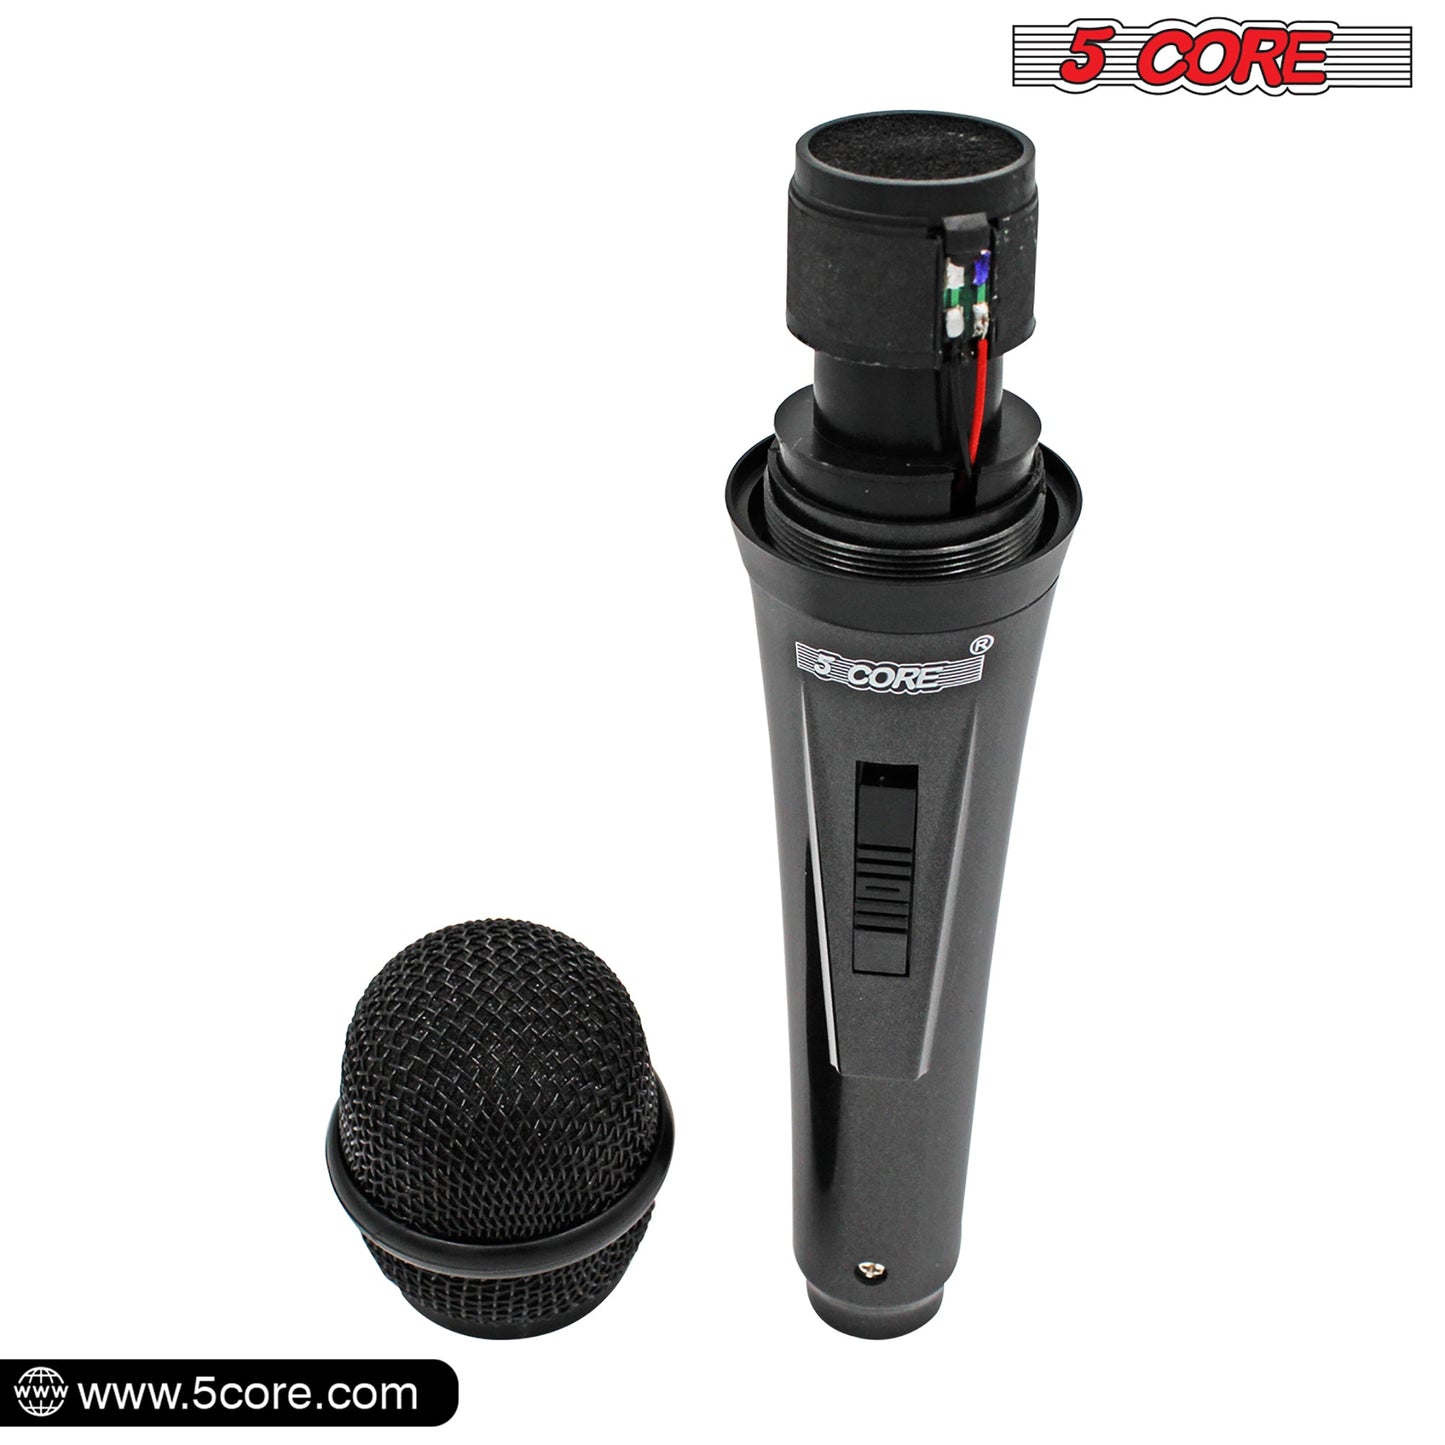 5 Core Microphone 1 Piece Professional Black Dynamic Karaoke XLR Wired Mic w ON/OFF Switch Integrated Pop Filter Cardioid Unidirectional Pickup Handheld Micrófono for Singing DJ Podcast Speeches Includes Cable Mic Holder - PM 816-3